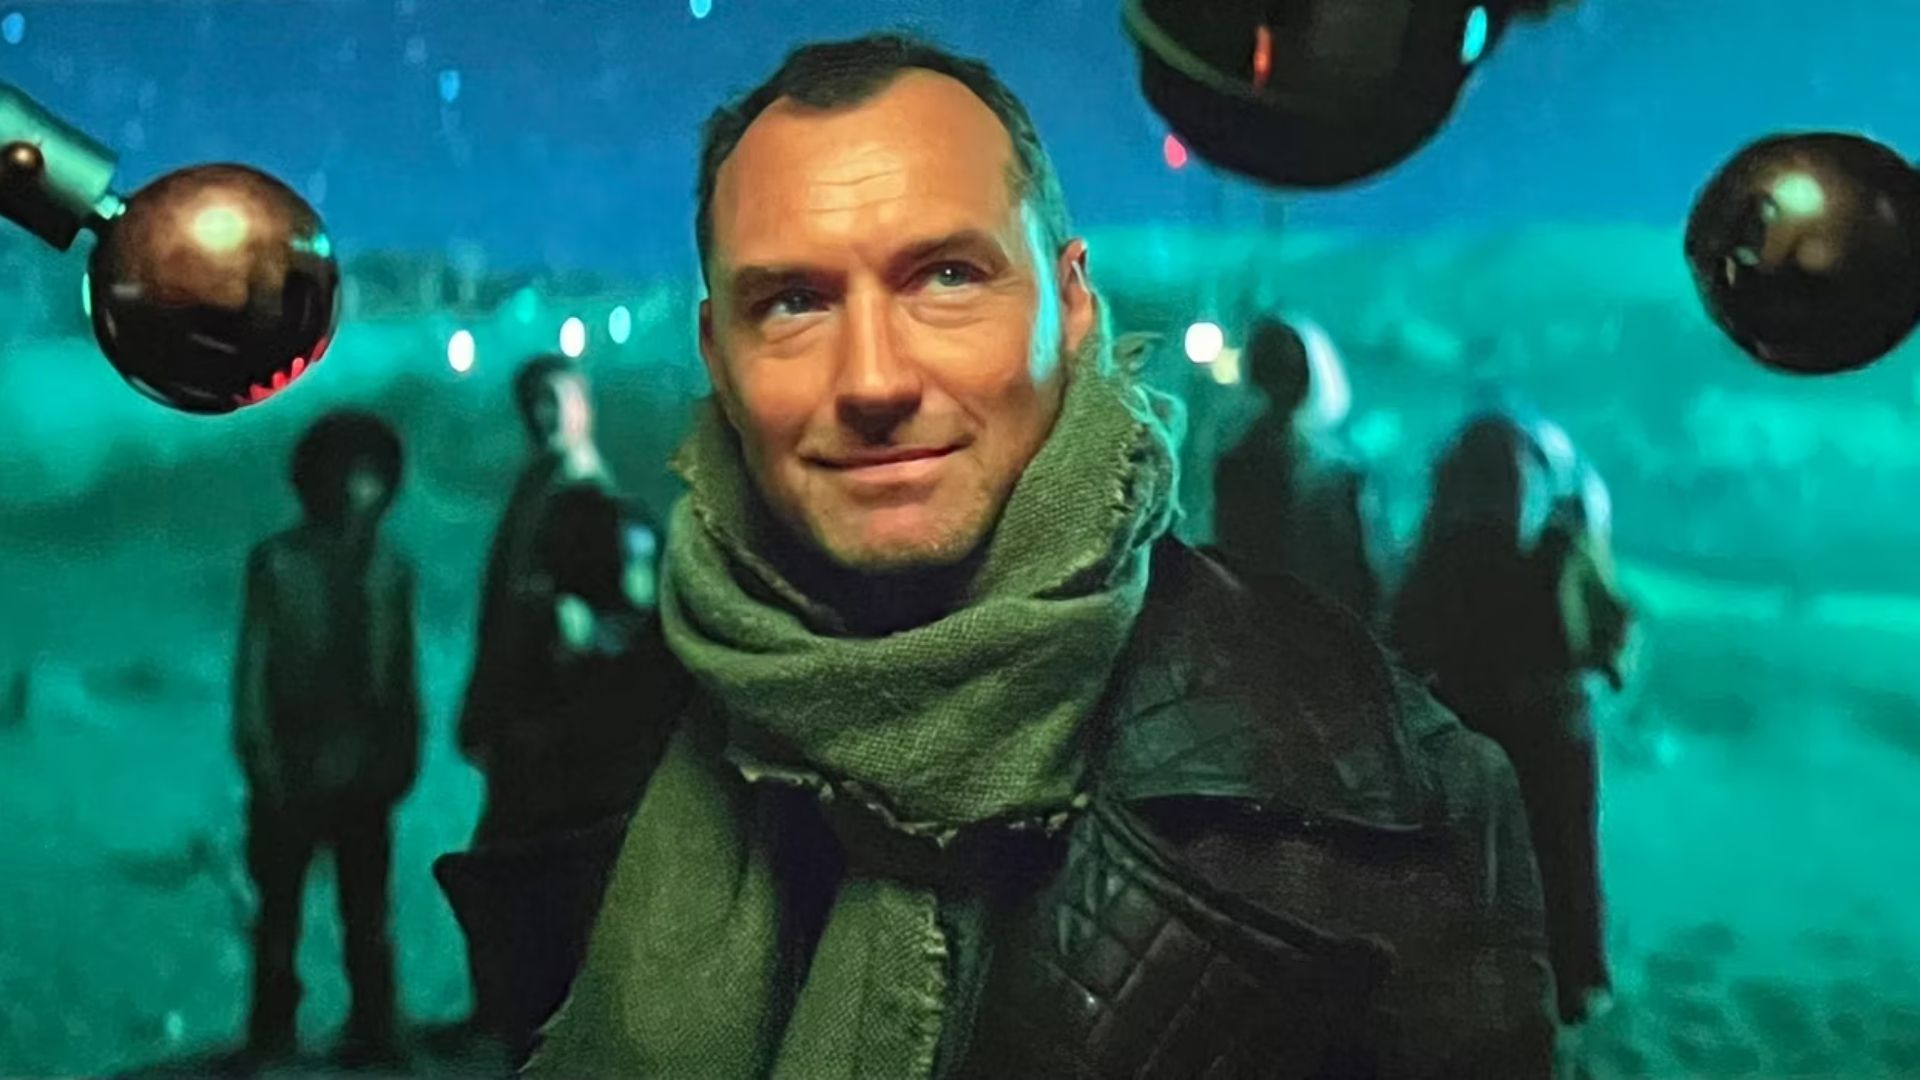 Jude Law in a scarf and leather jacket as Force-user in Star Wars Skeleton Crew